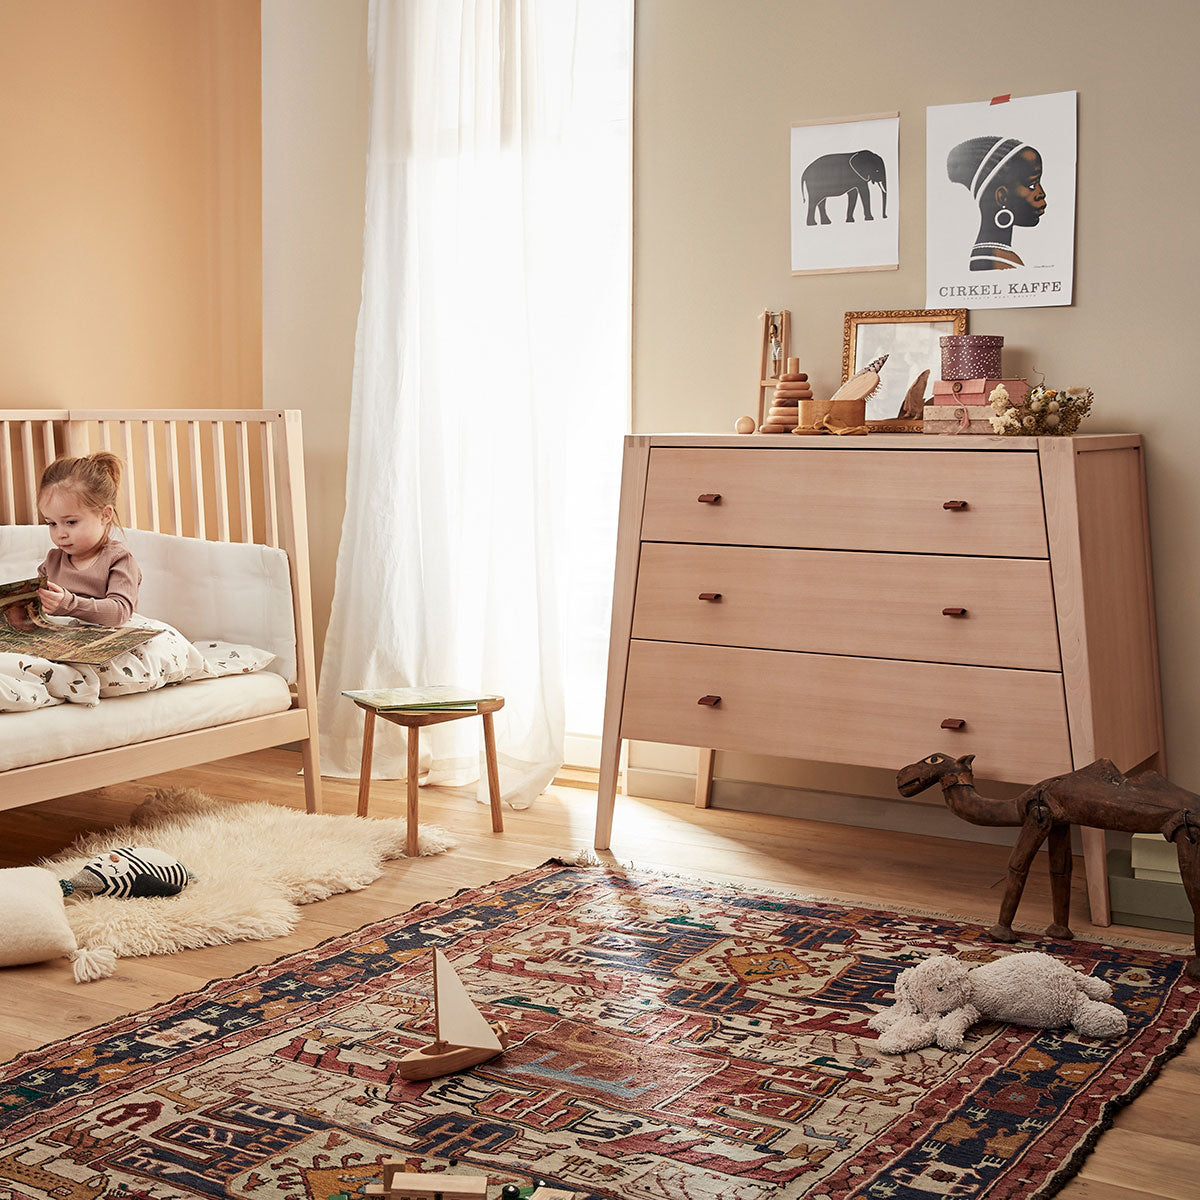 Linea Dresser and Changing Table Natural Wood - Leander